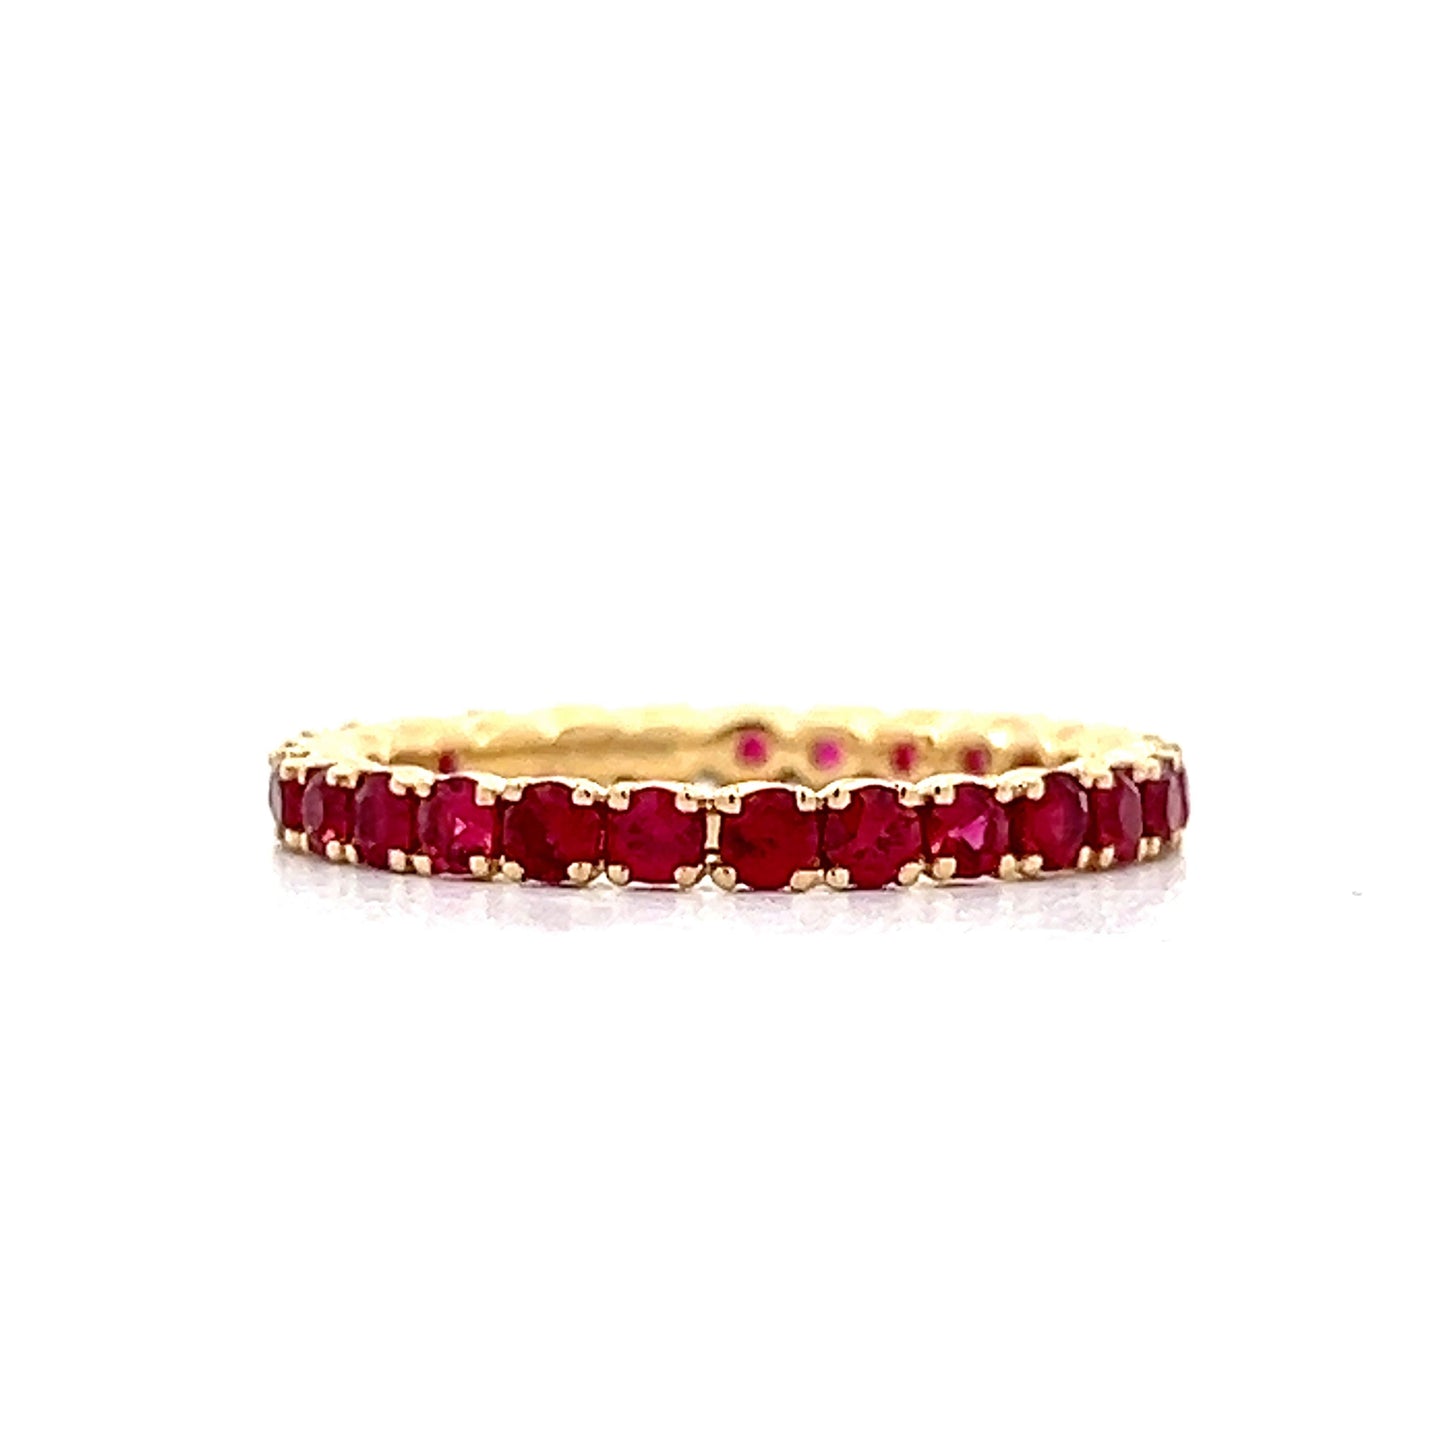 .81 Round Ruby Eternity Stacking Band in 14k Yellow Gold